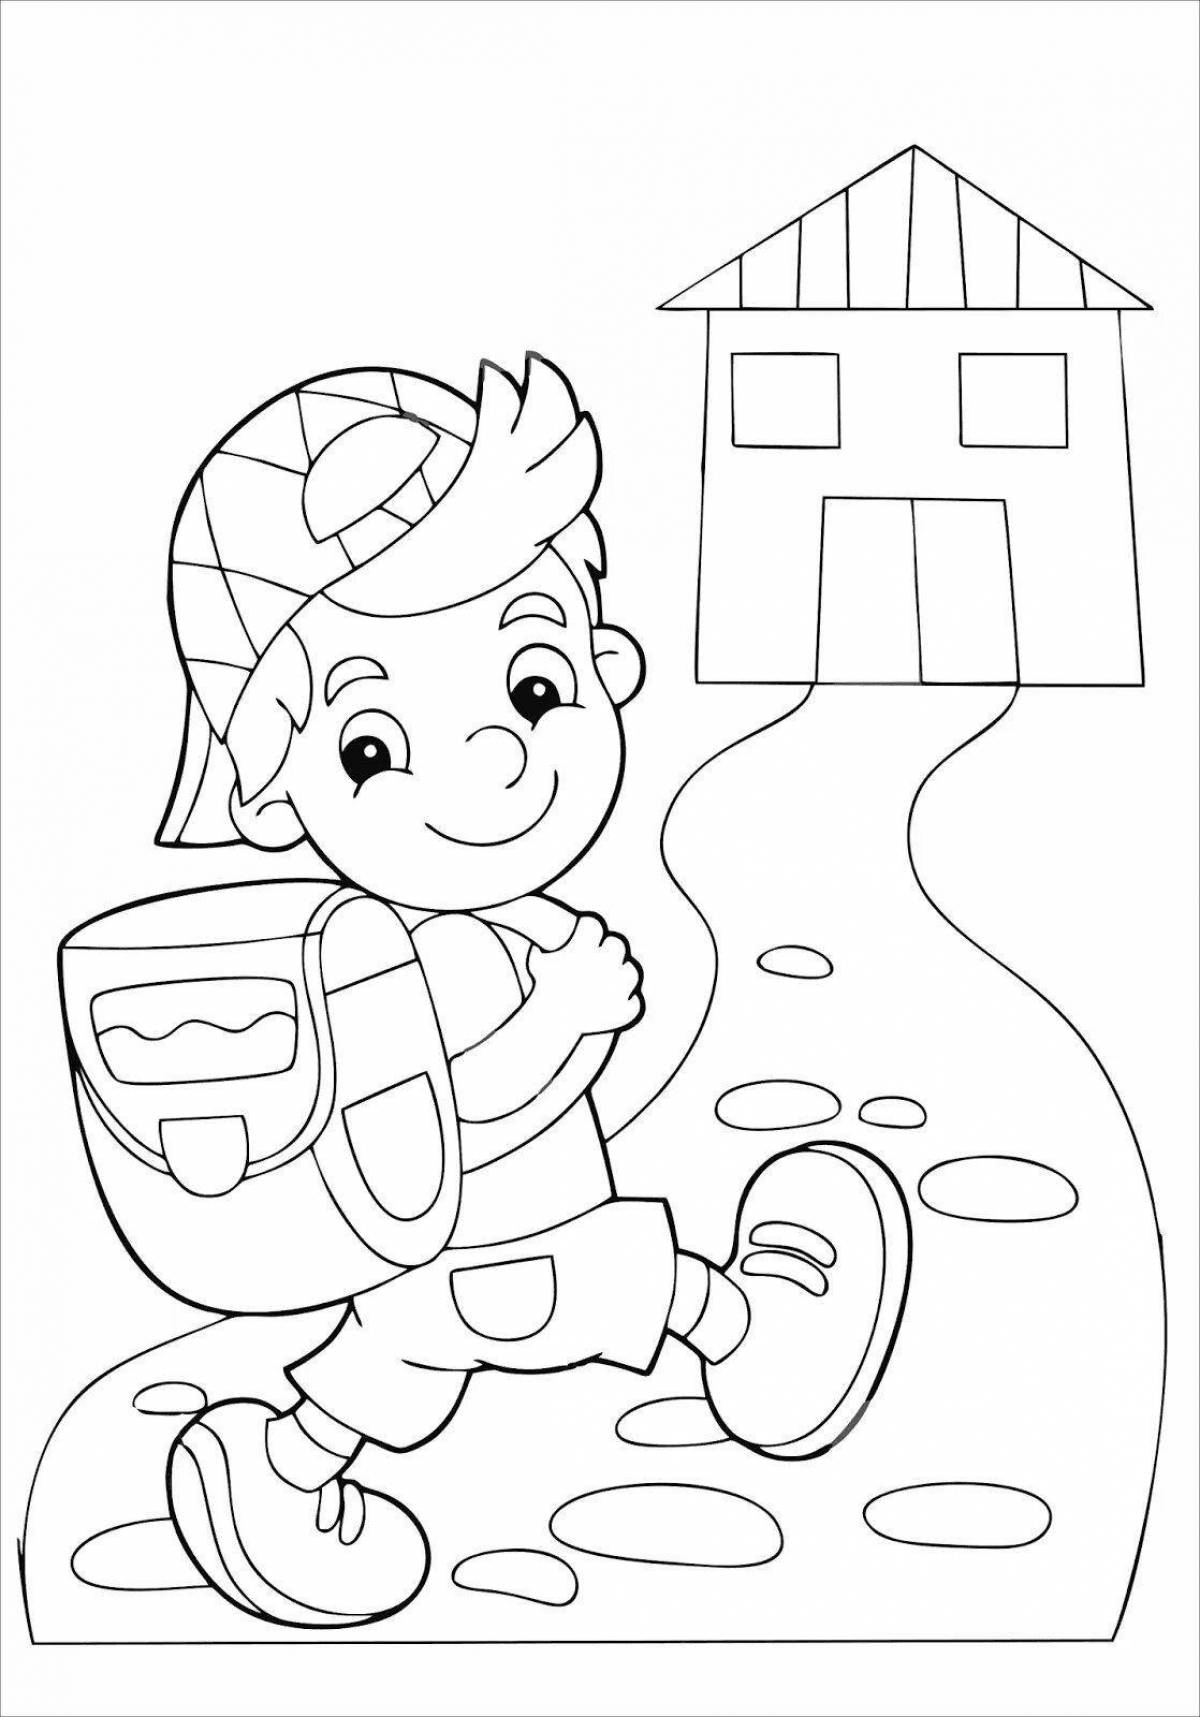 Fantastic road home coloring page